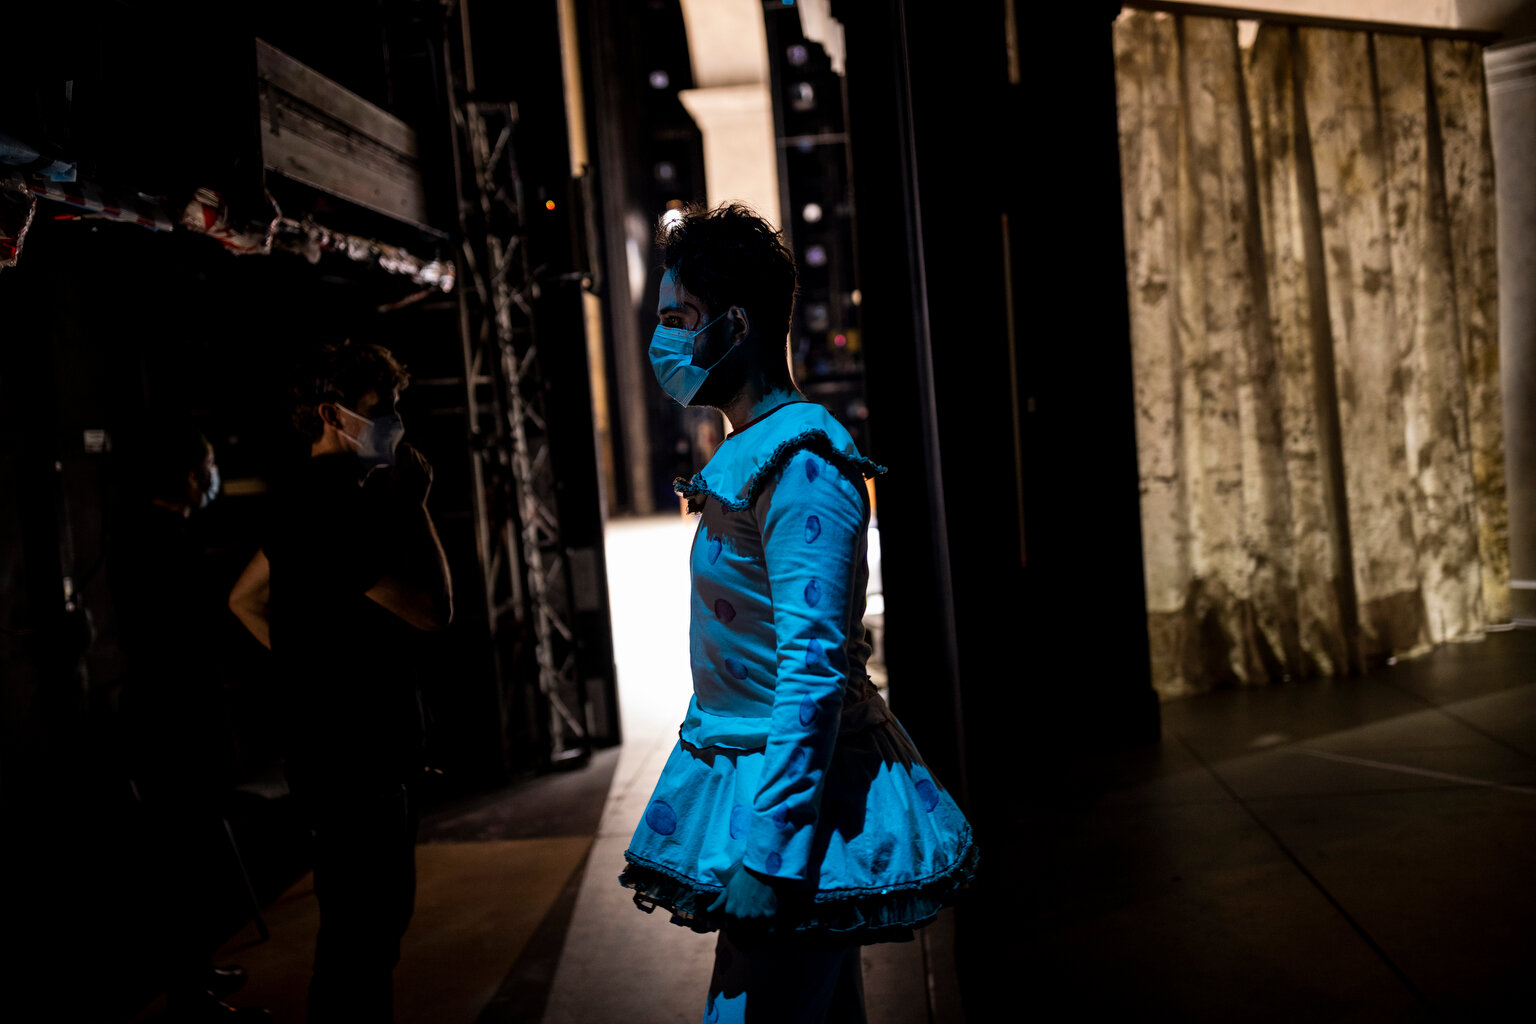  An opera cast member, wearing a mask to prevent the spread of coronavirus, waits behind the stage during the performance of Rusalka in Teatro Real, Madrid, Spain Thursday, Nov. 12, 2020. (AP Photo/Bernat Armangue) 